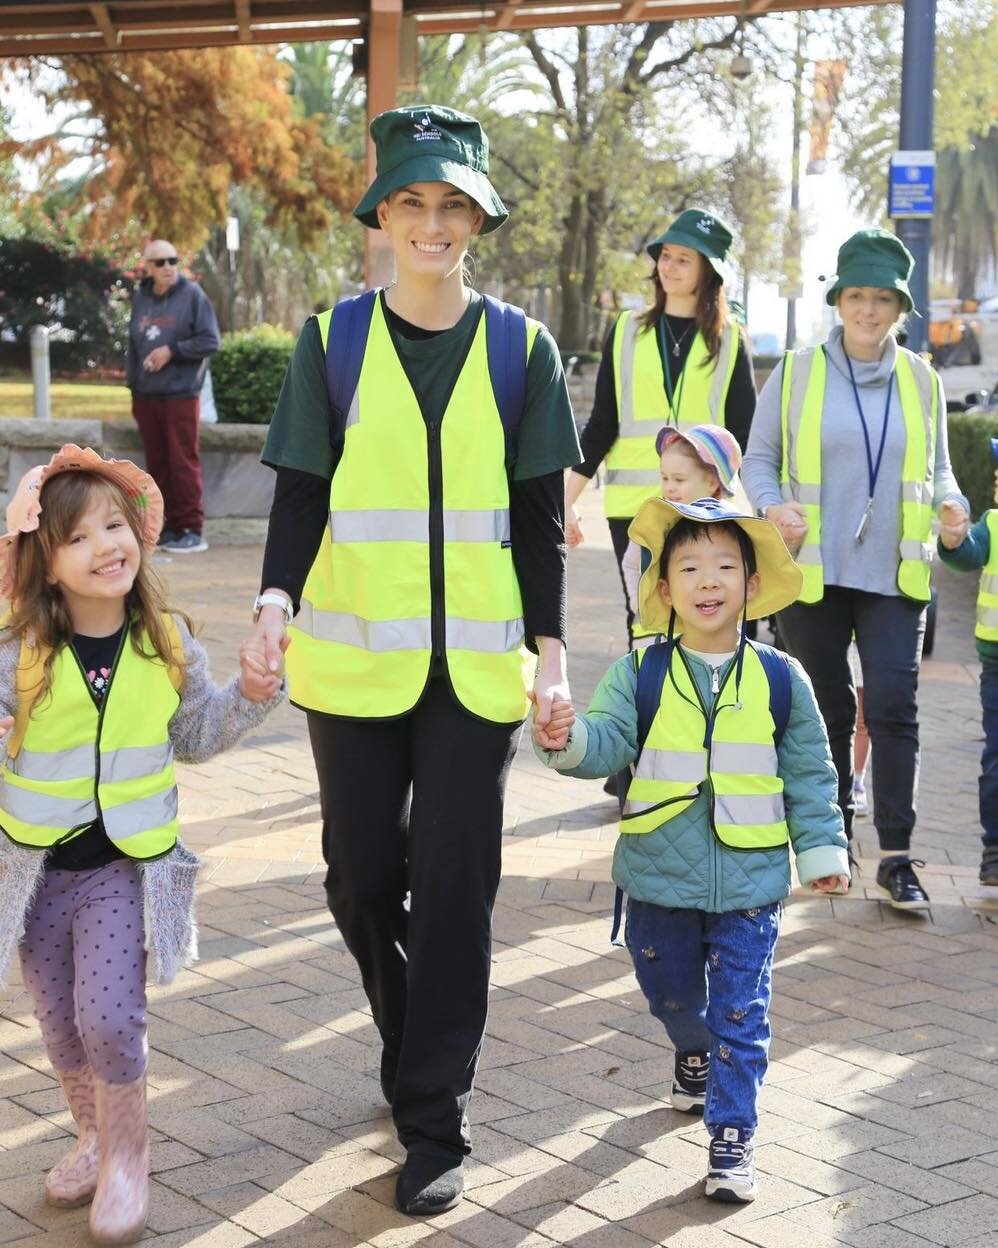 ✨Excursion time

Last Friday our babies and preschools went for a walk to deliver some donated food to the local community Centre. On our walk we passed the train station and the bus depo, where educators took the opportunity to speak about road safe